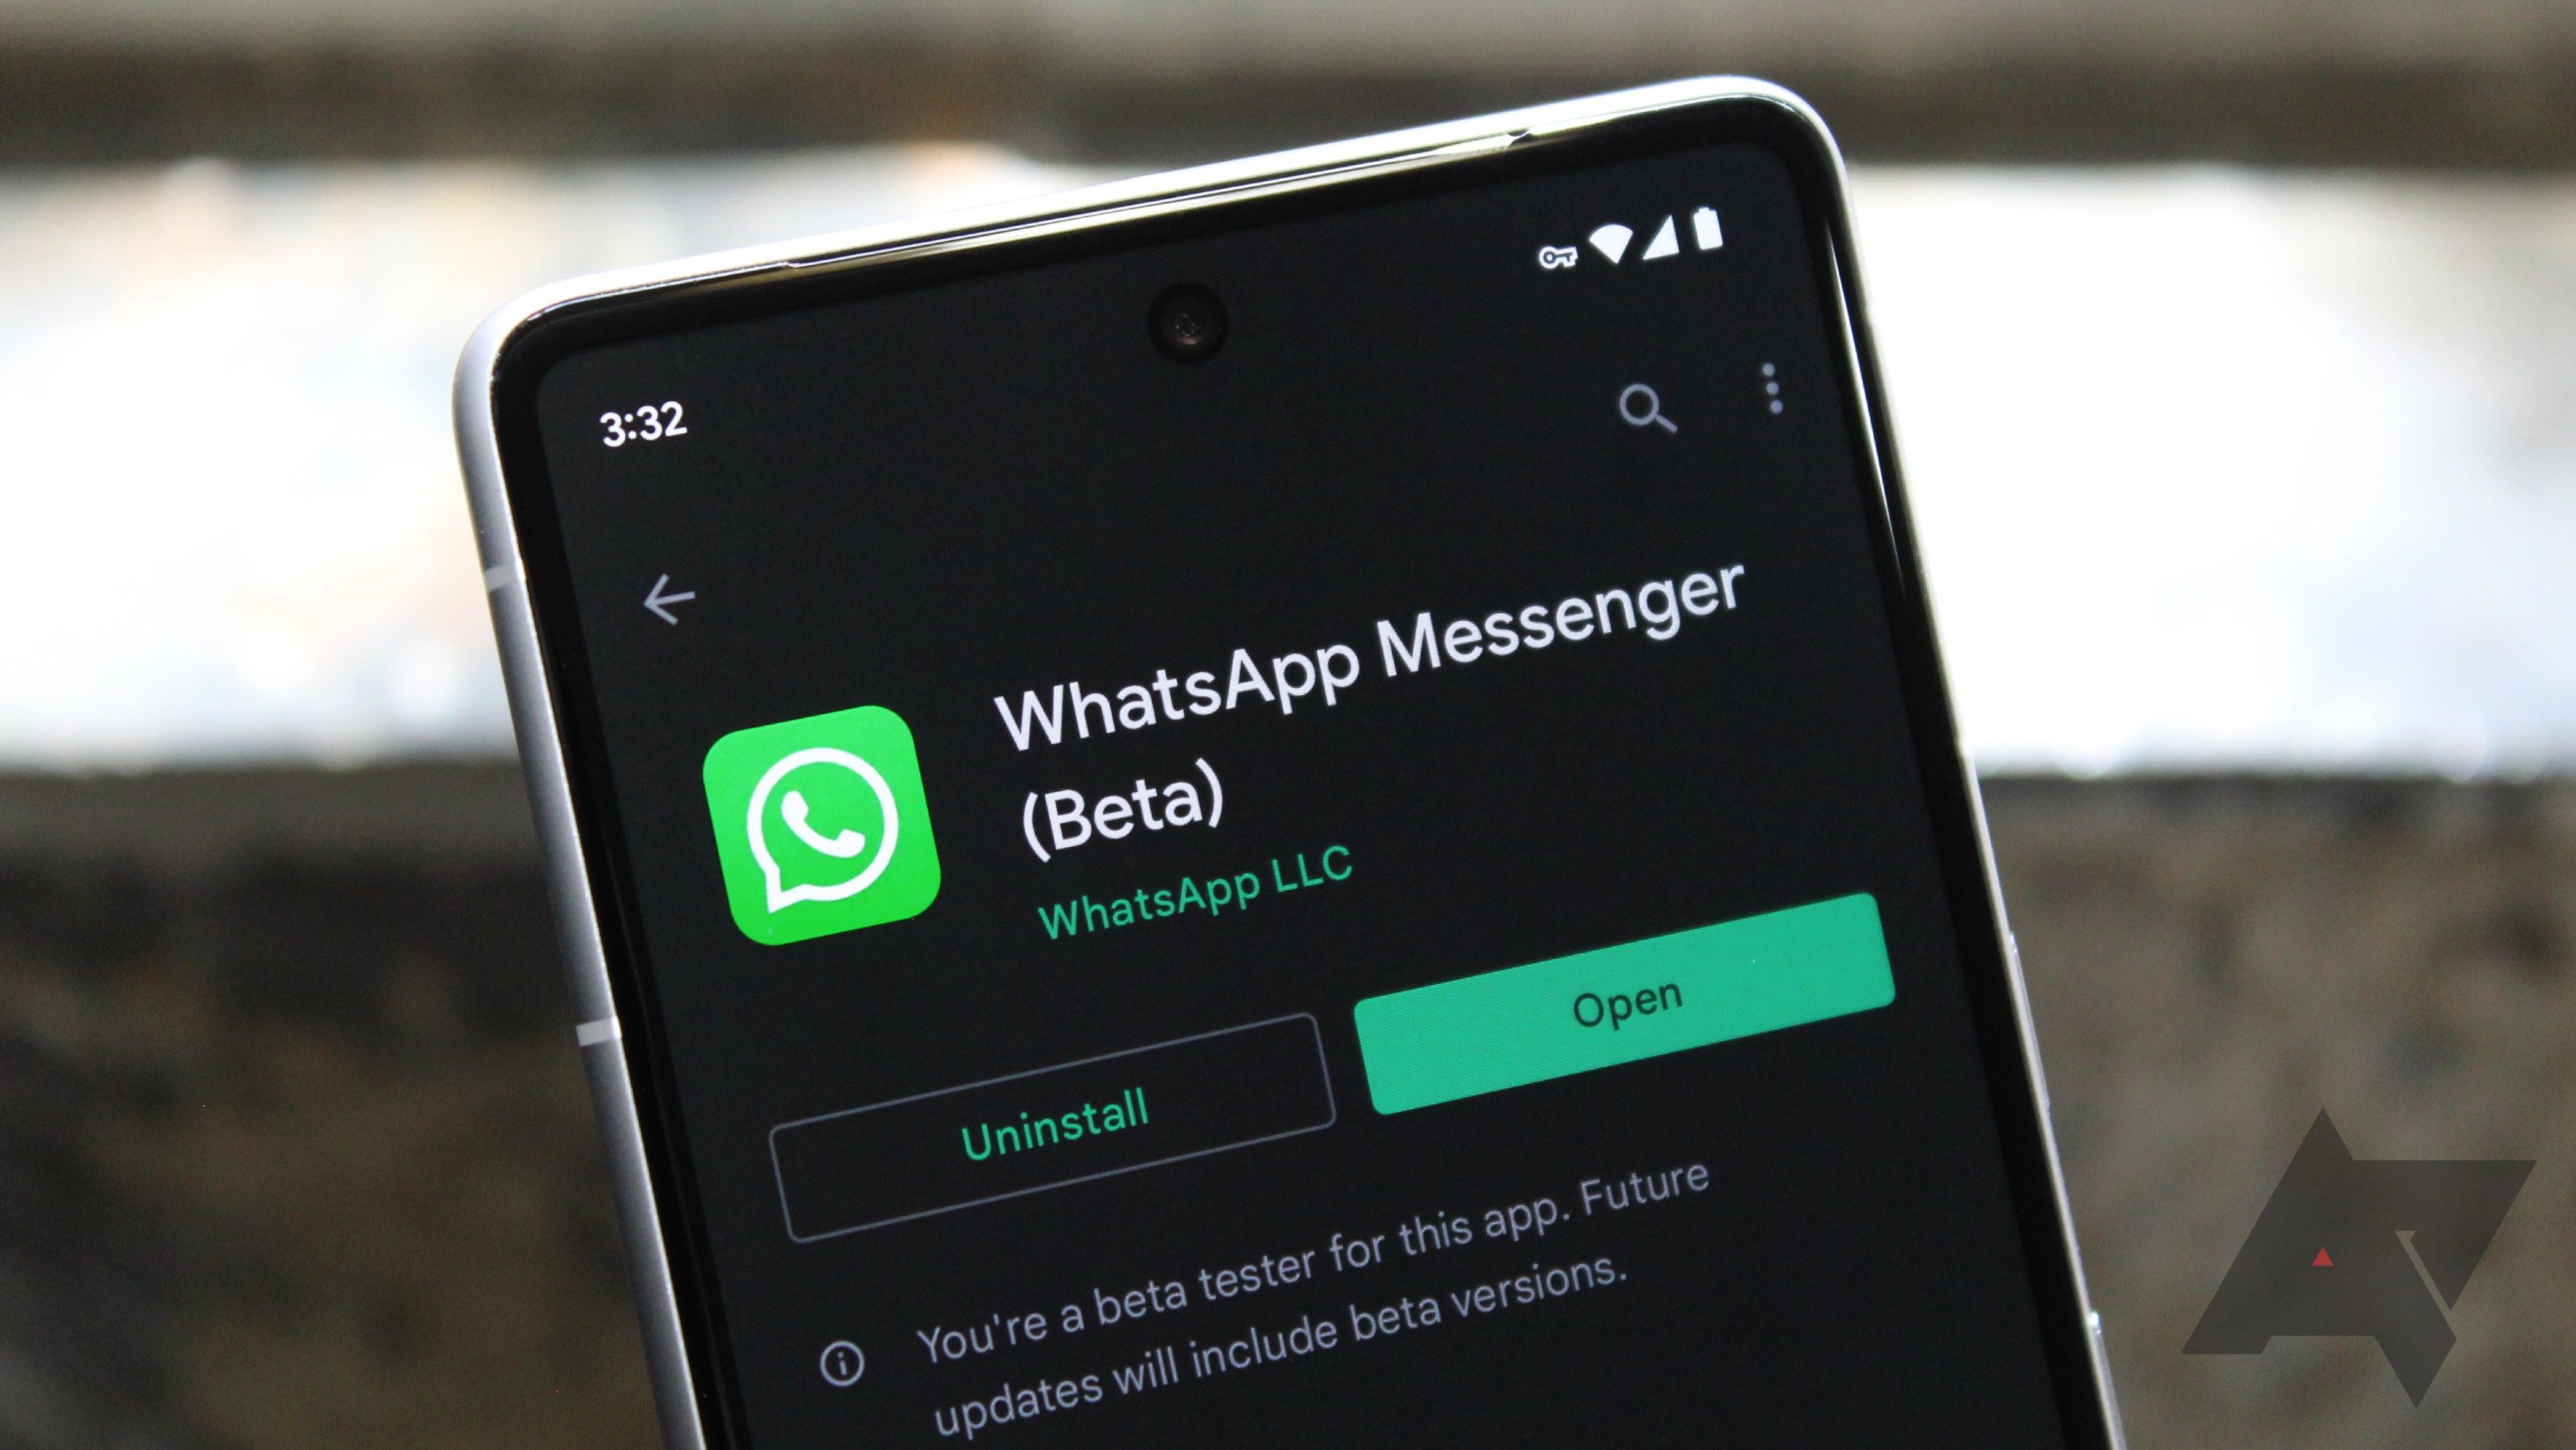 Improved search bar on WhatsApp enhances user experience